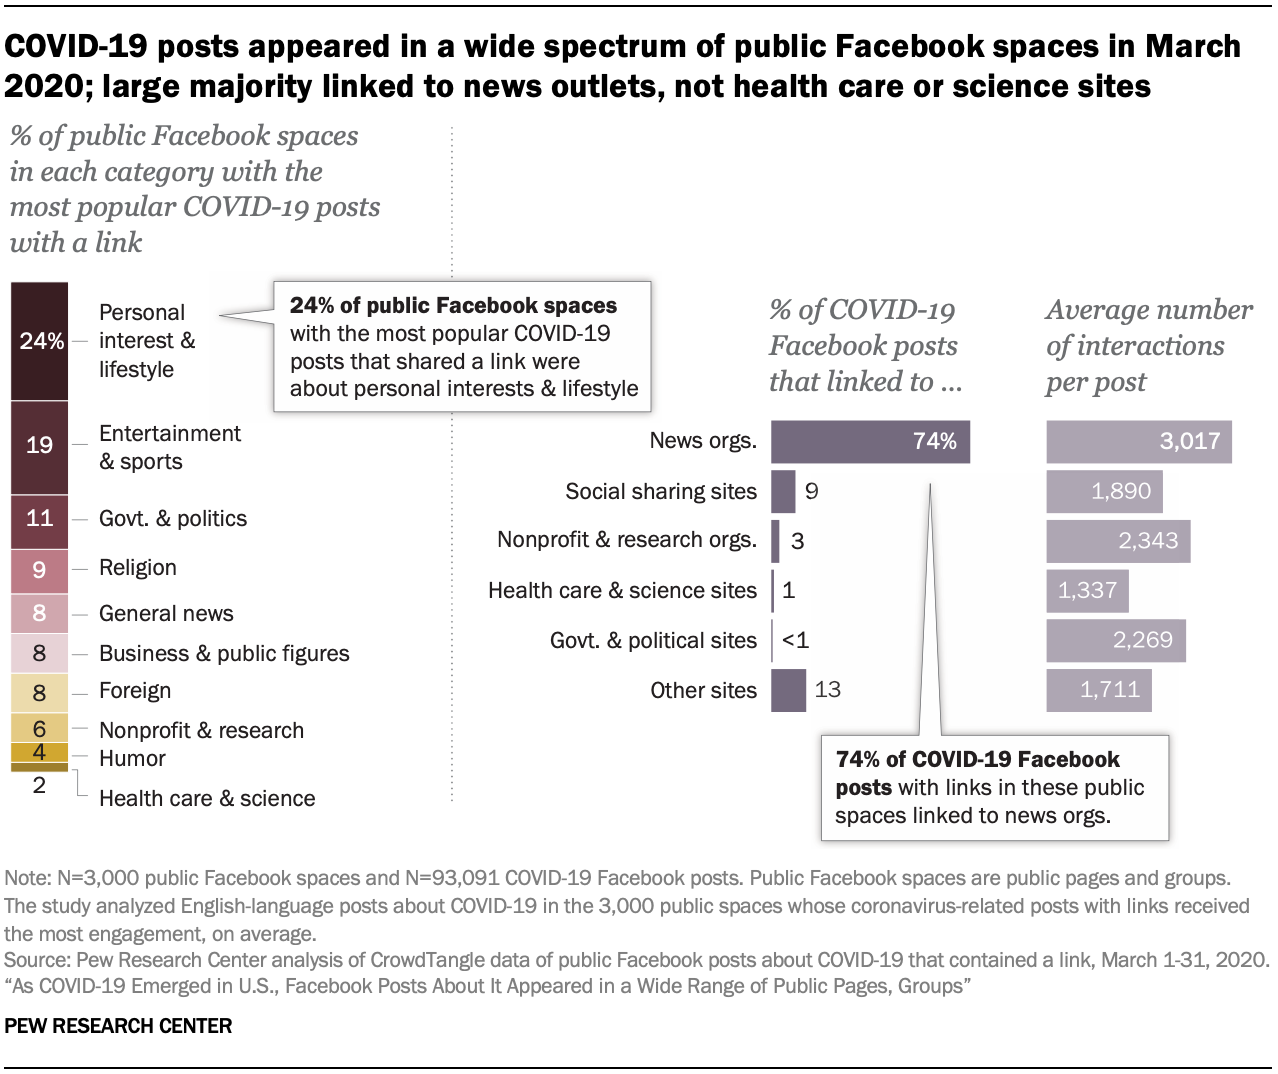 COVID-19 posts appeared in a wide spectrum of public Facebook spaces in March 2020; large majority linked to news outlets, not health care or science sites